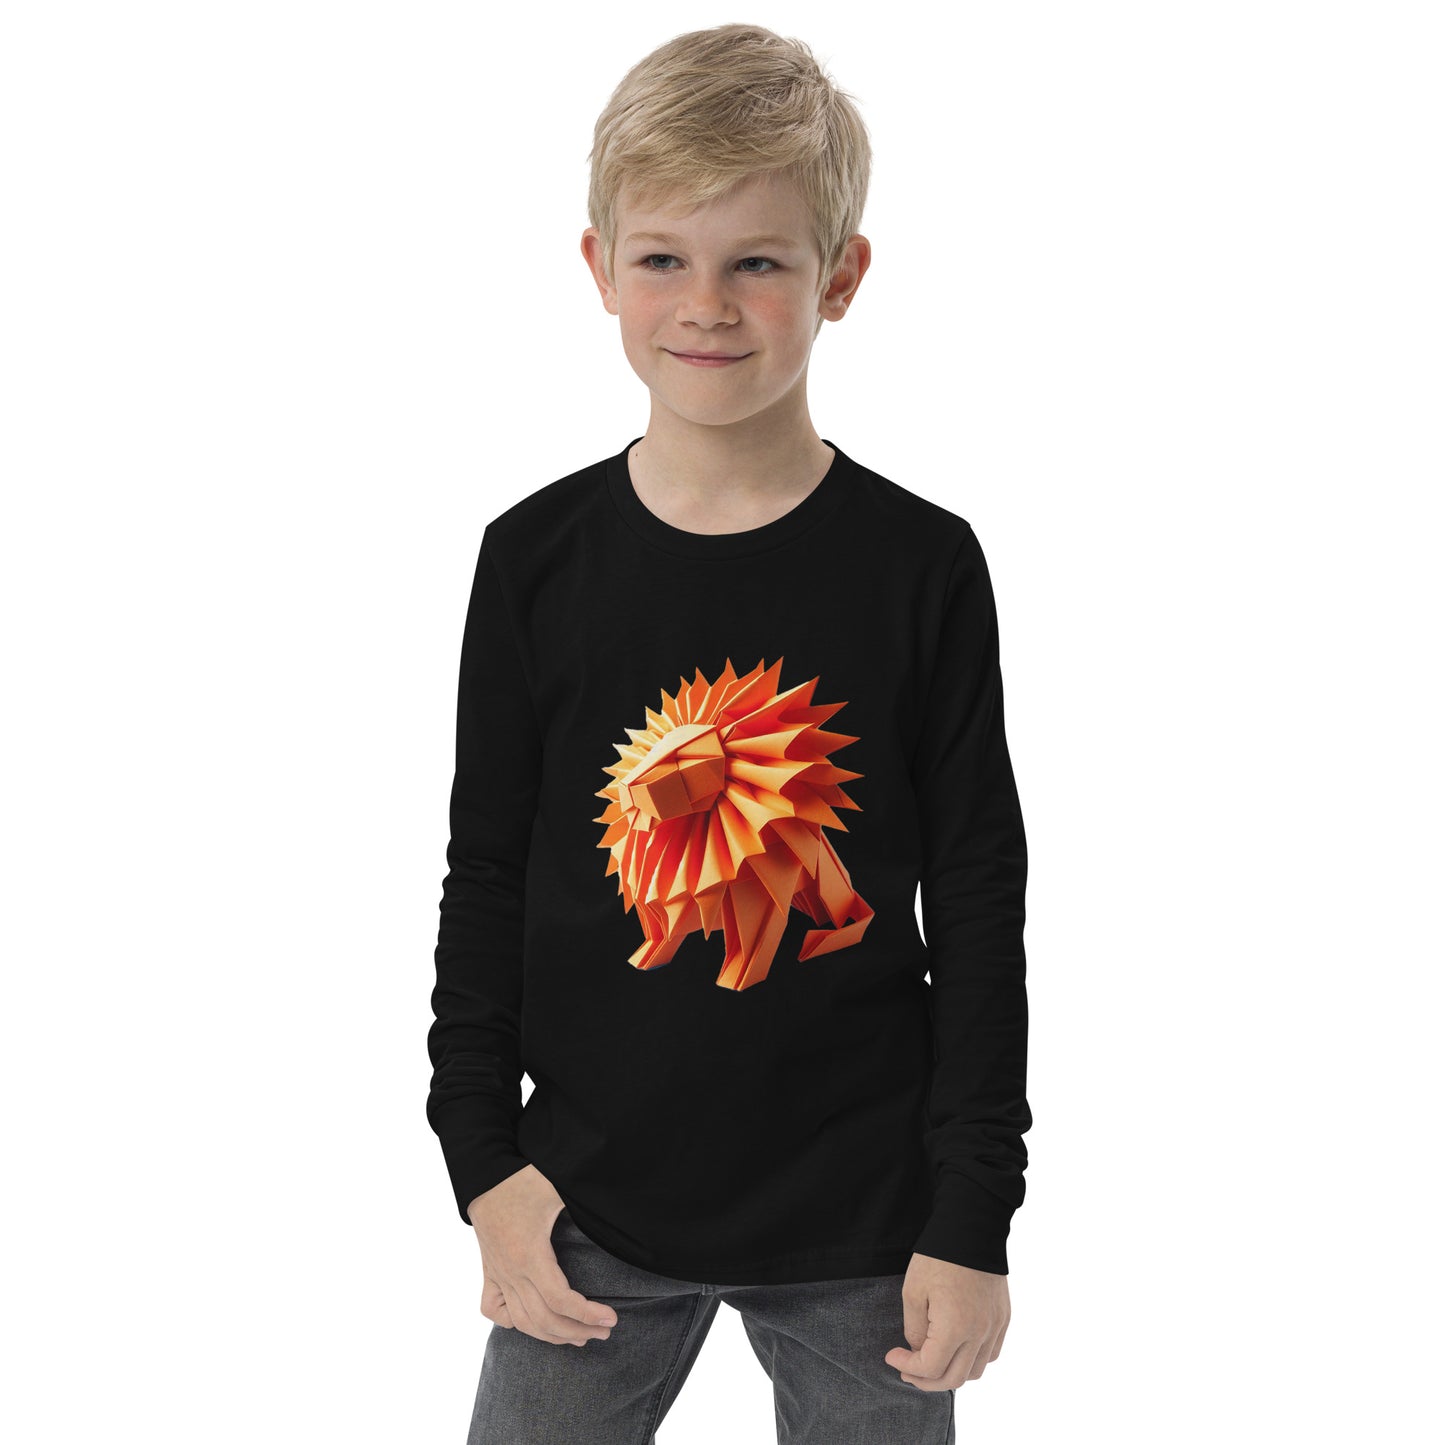 Youth with black long sleeve T-shirt with print of a lion